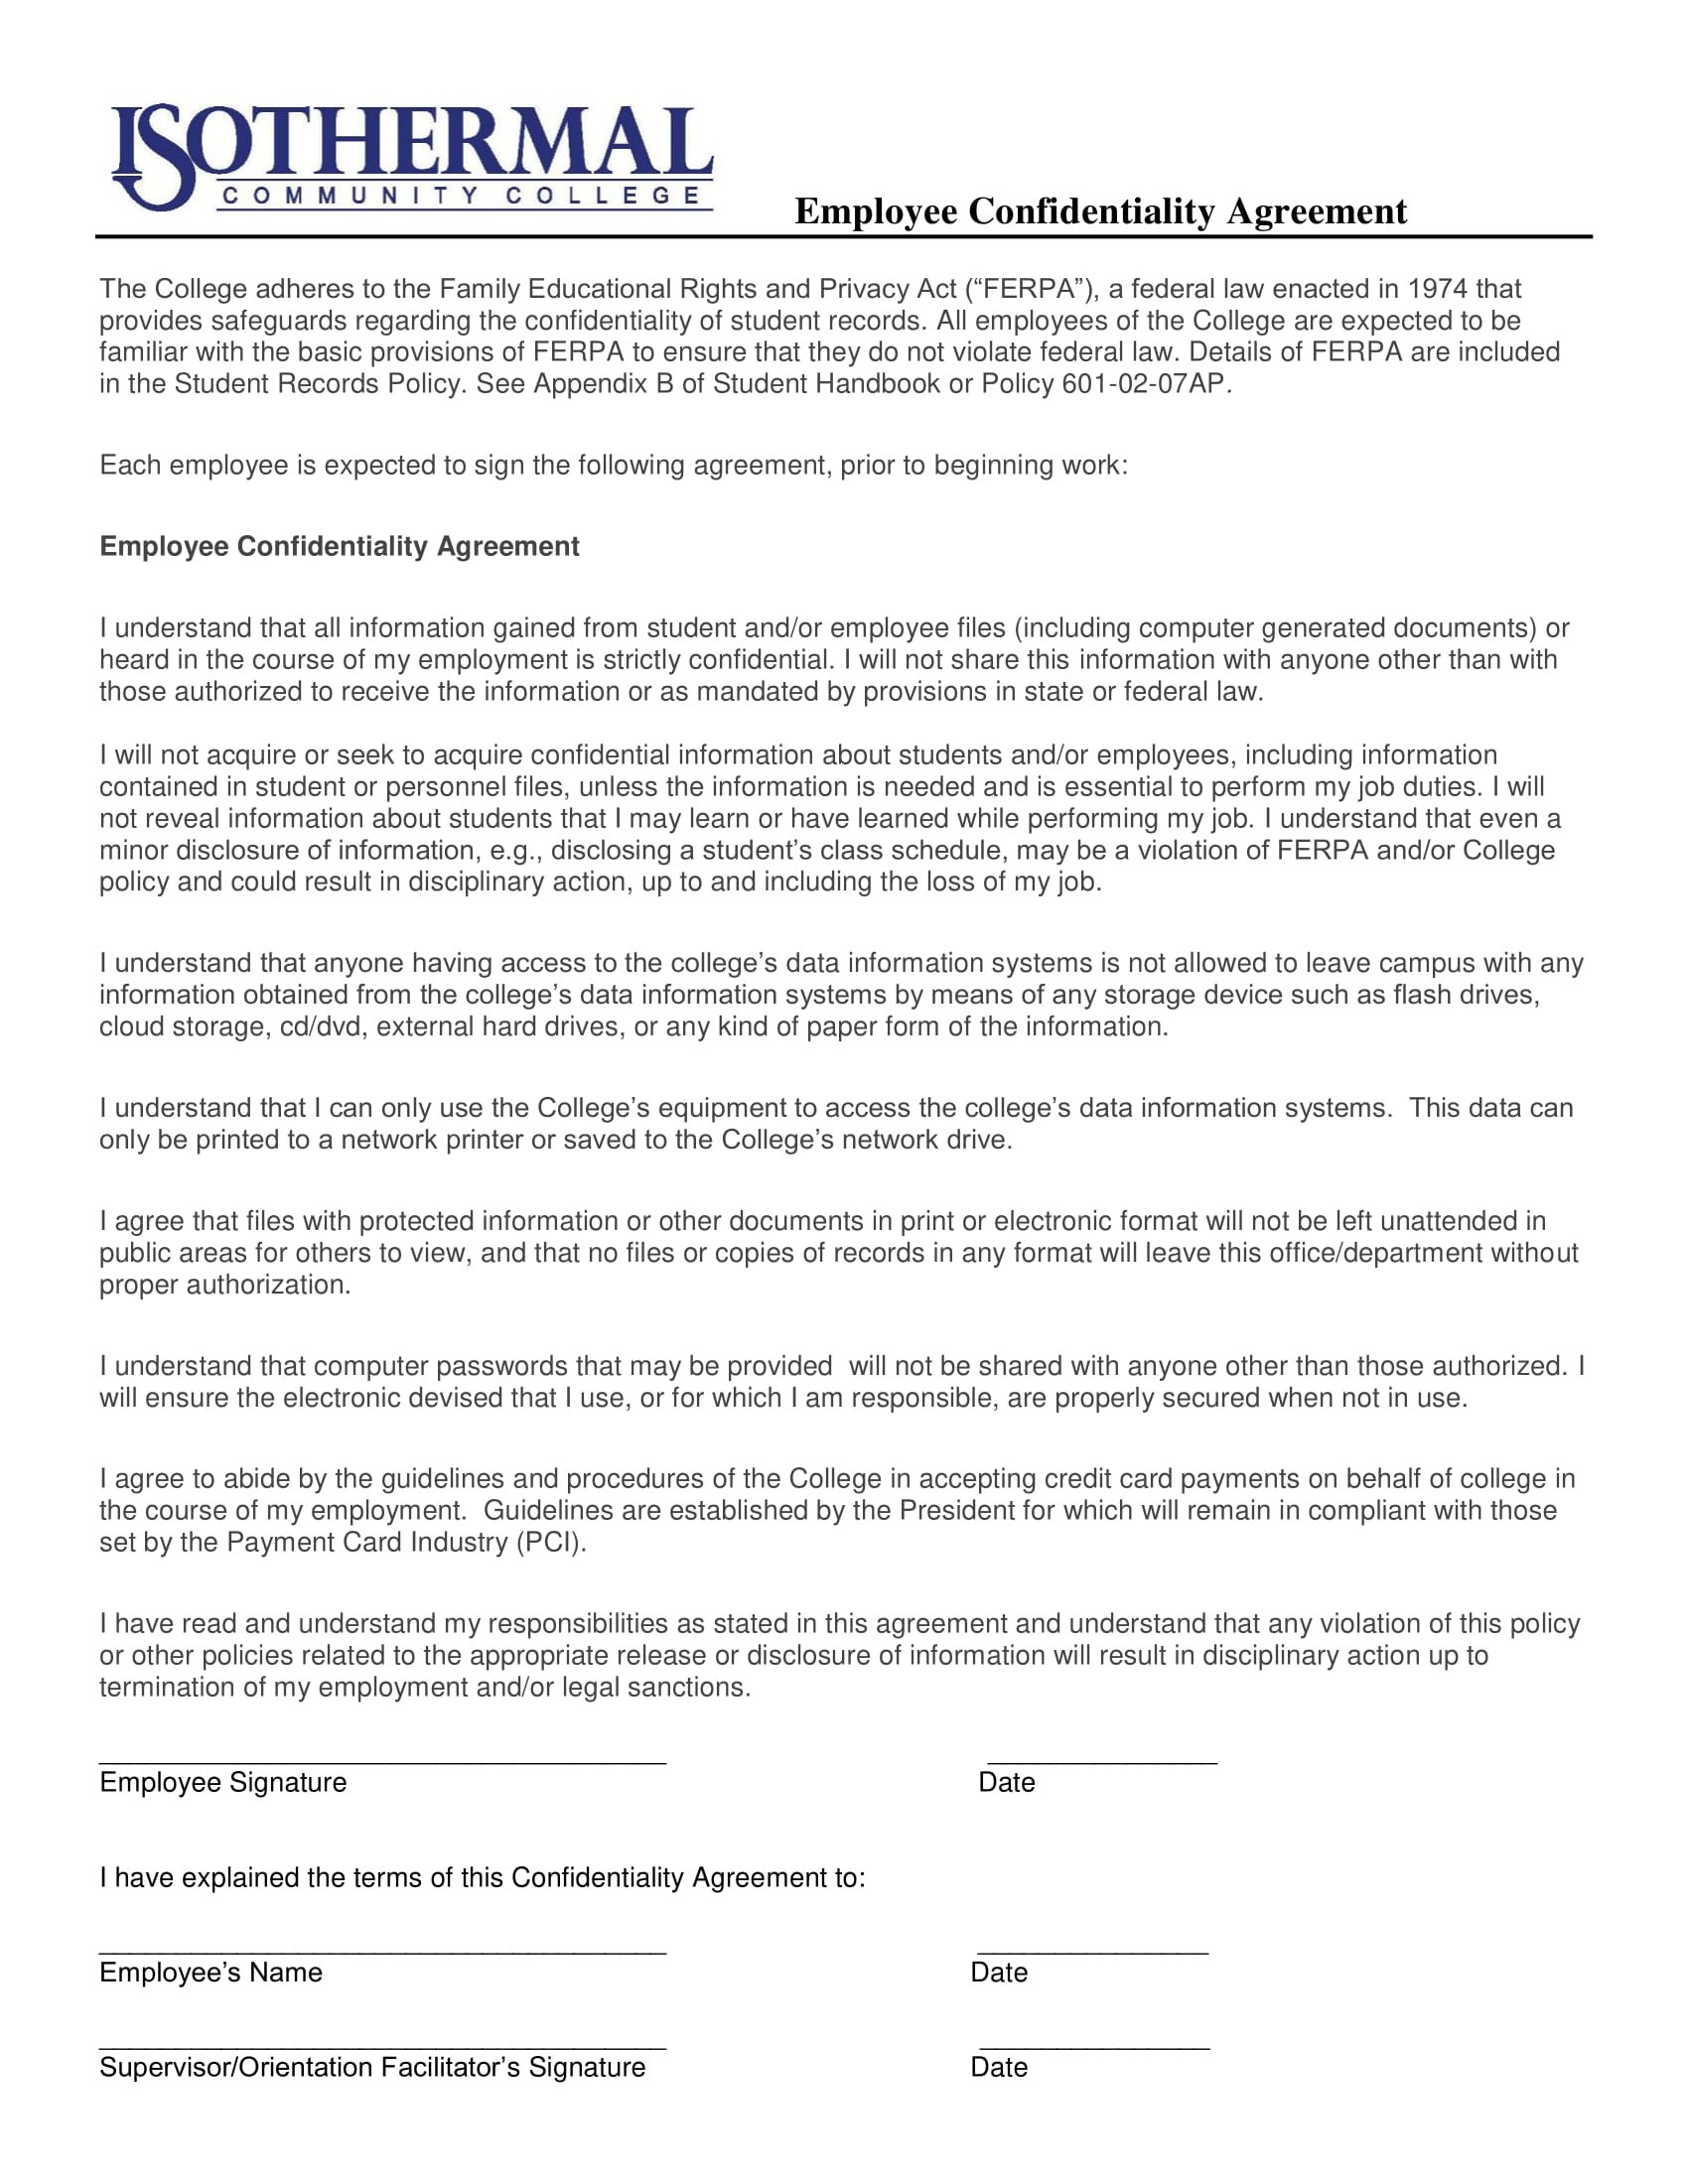 Employee Confidentiality Agreement Examples  Pdf Word  Examples inside Word Employee Confidentiality Agreement Templates